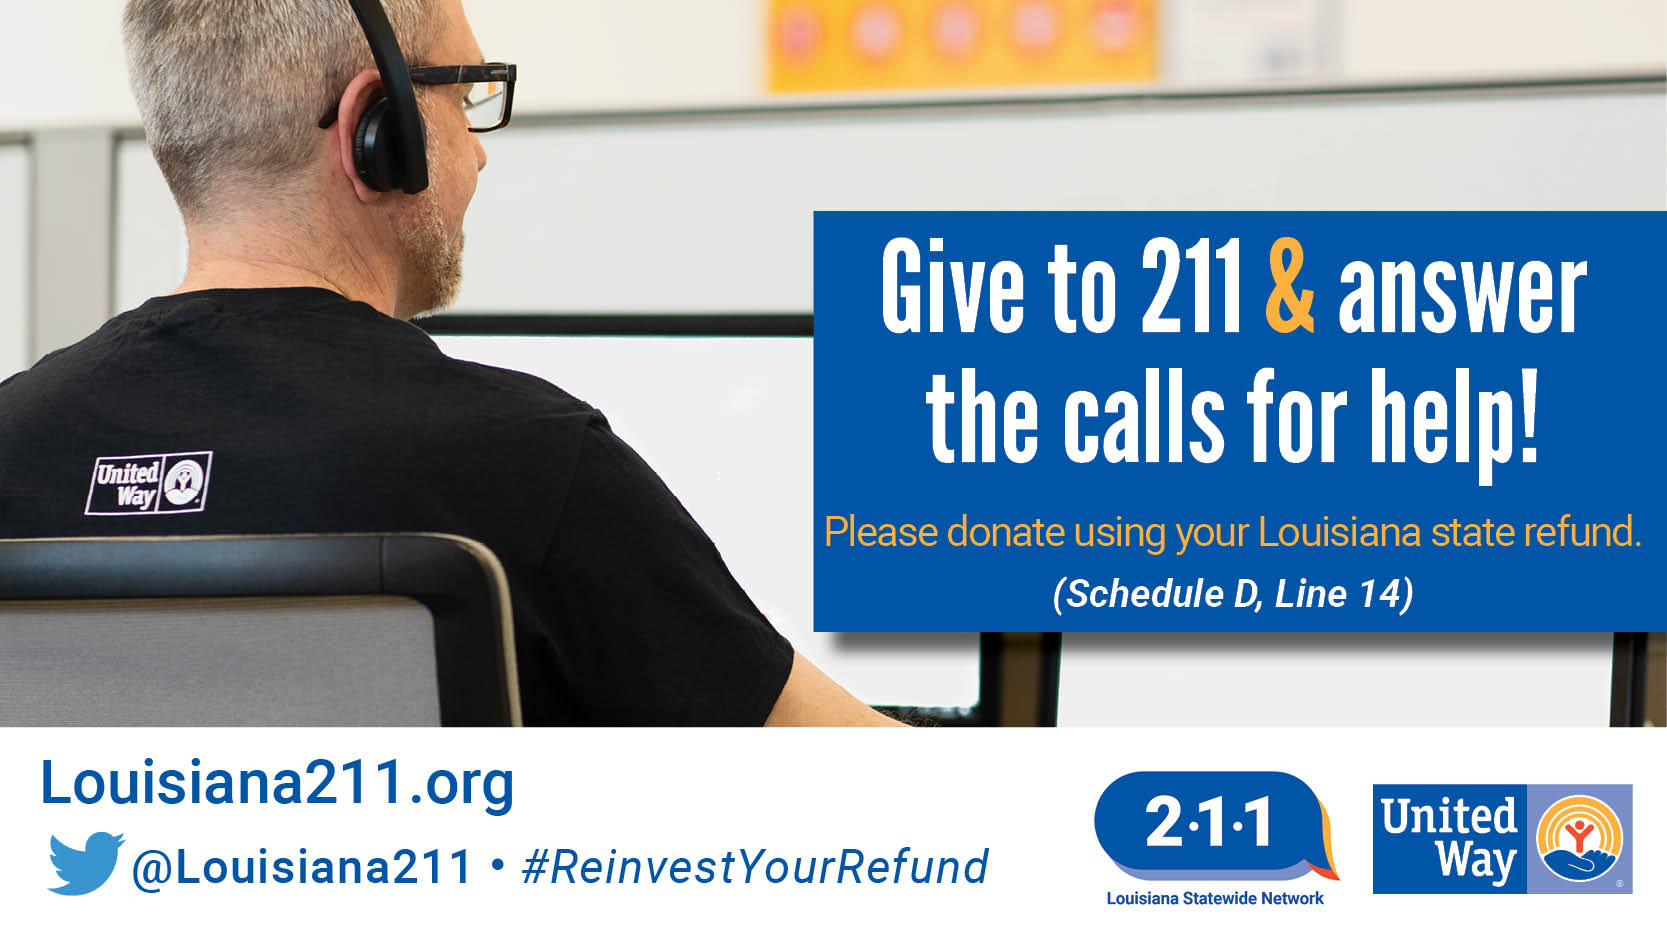 Give to 211 & answer the calls for help.